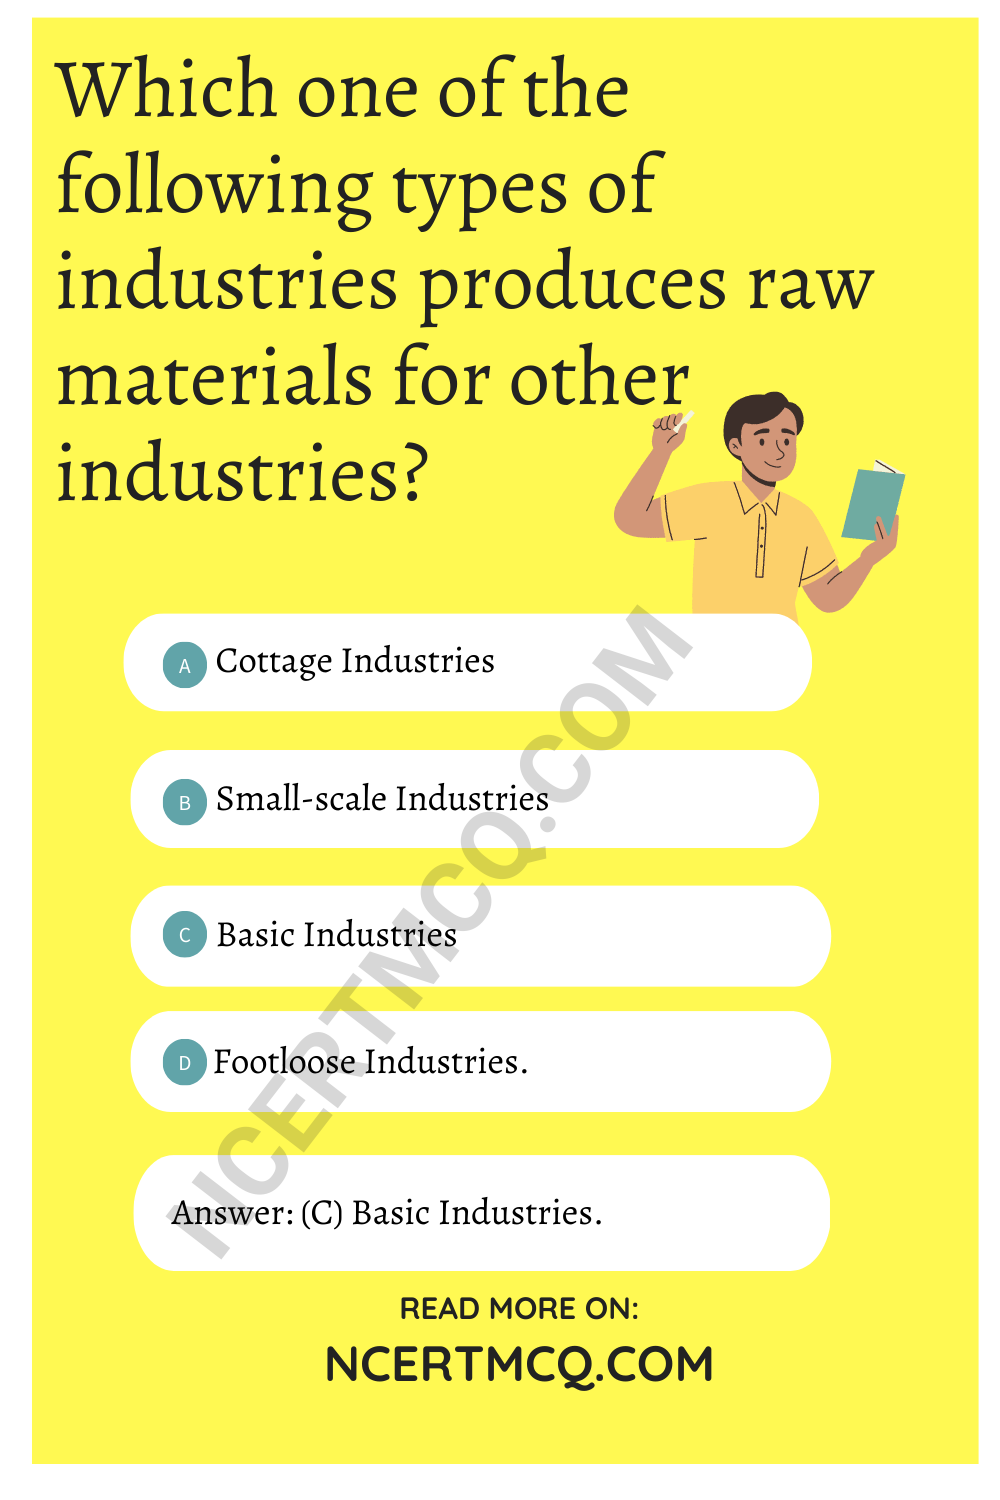 Which one of the following types of industries produces raw materials for other industries?